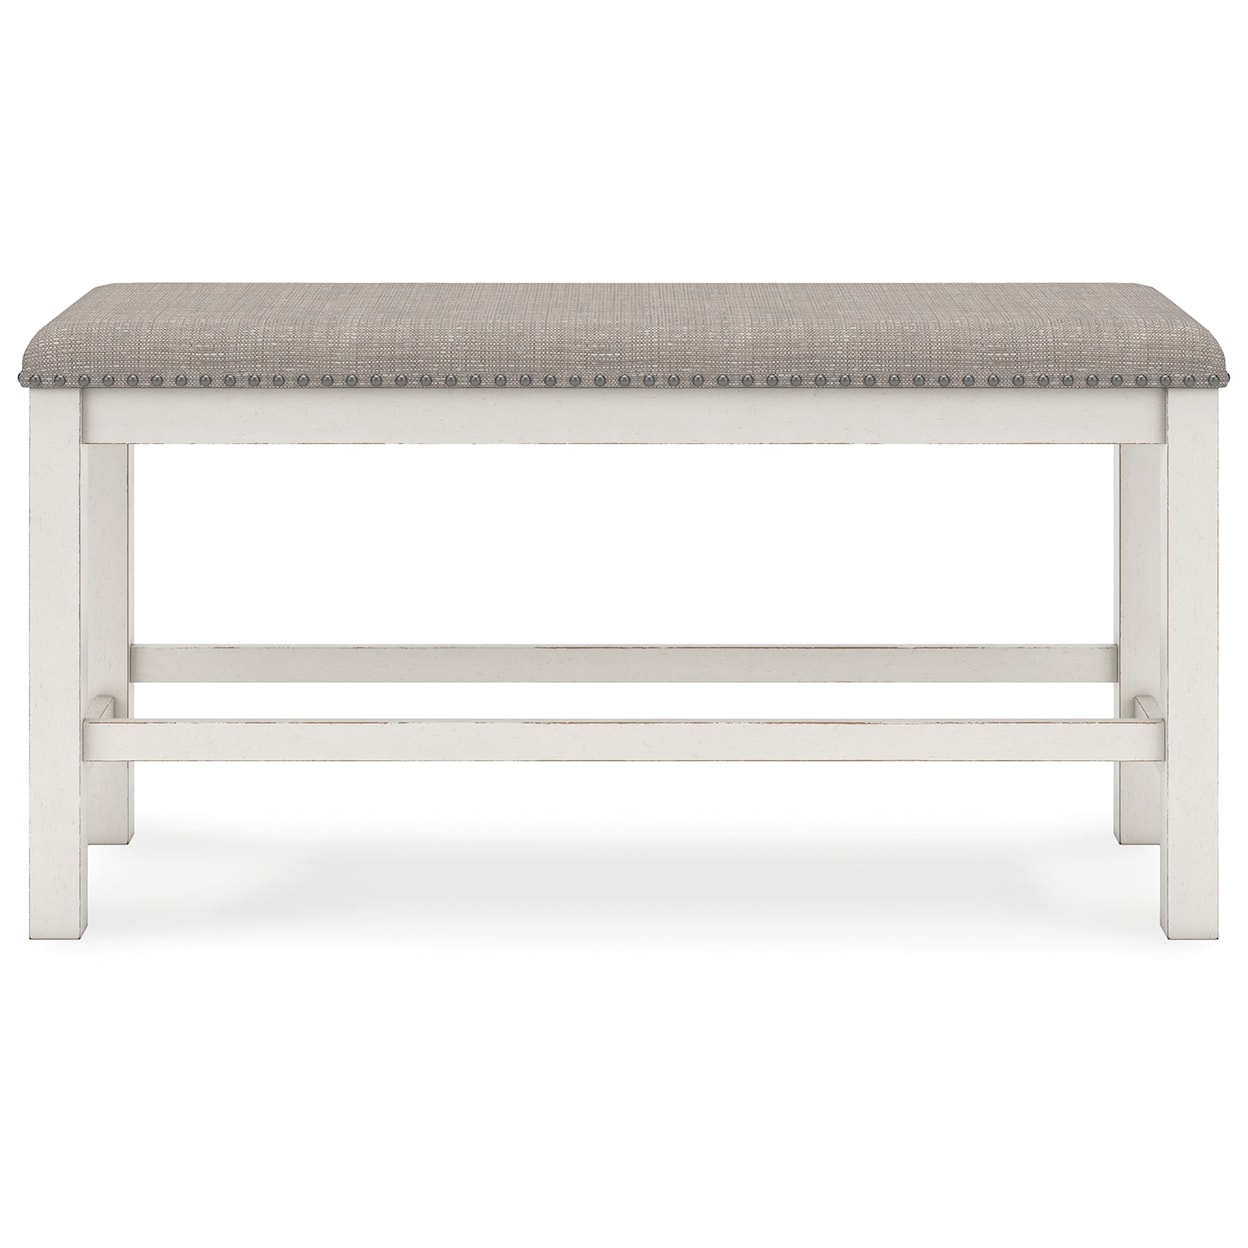 Benchcraft Robbinsdale 49" Counter Height Dining Bench